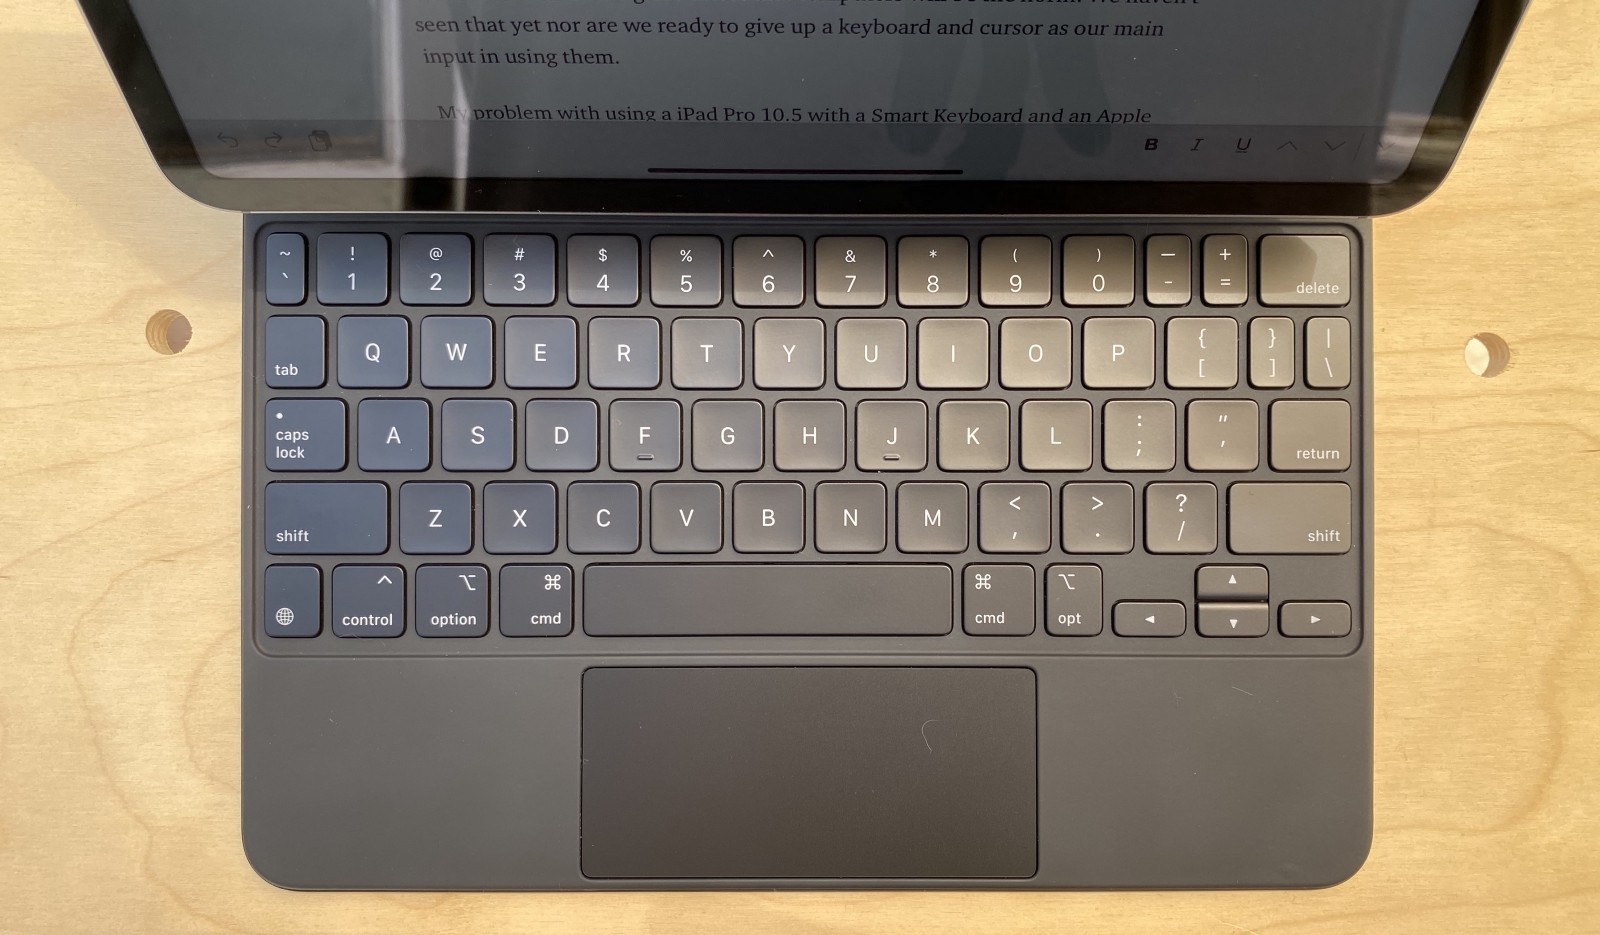 Top view of the Magic Keyboard for the iPad Pro 11-inch